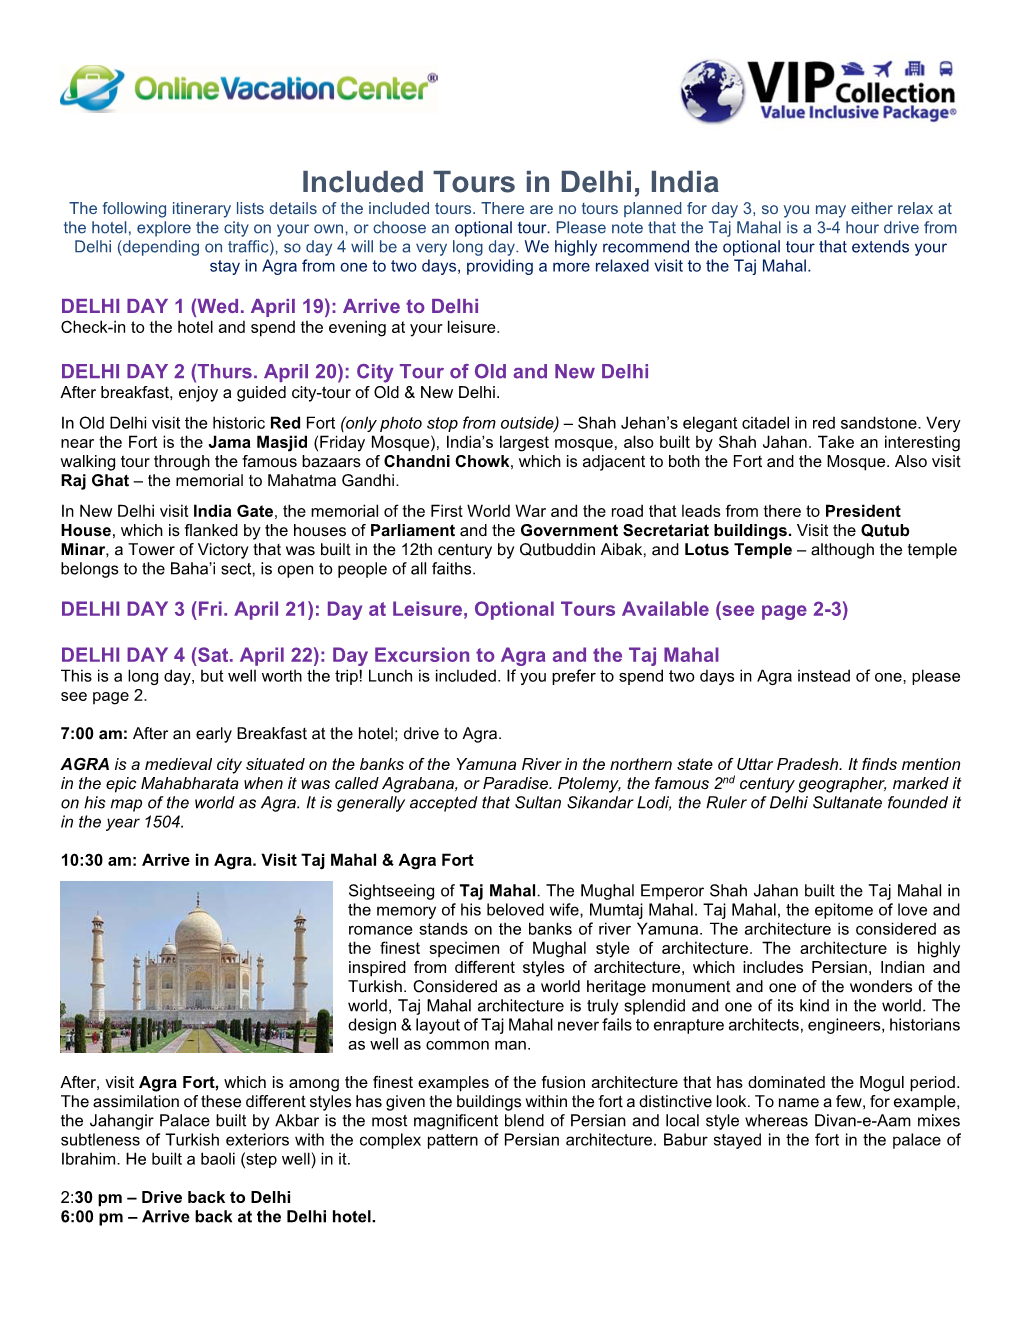 Included Tours in Delhi, India the Following Itinerary Lists Details of the Included Tours